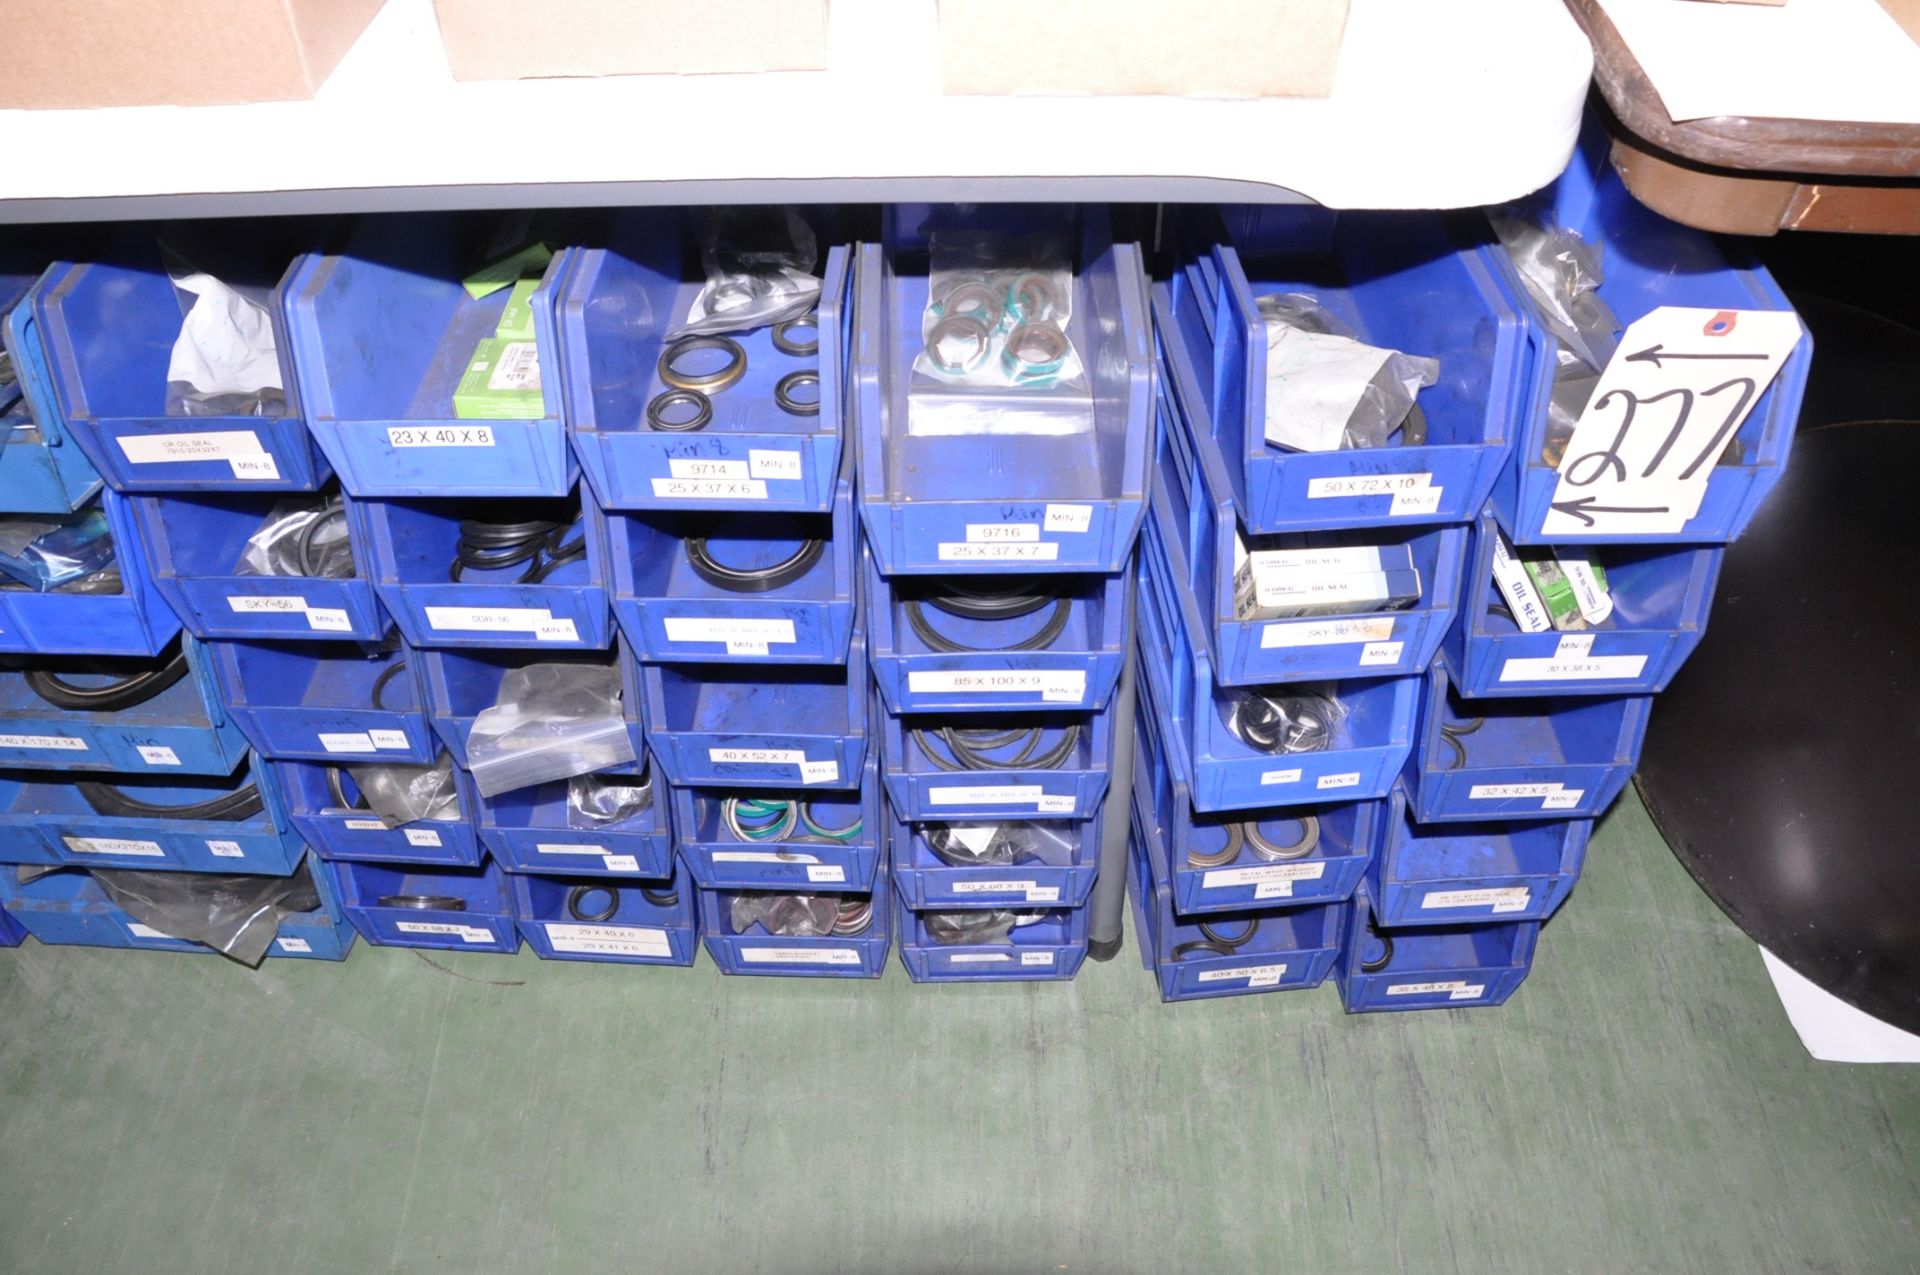 Lot-Various Bearing Seals in Blue Parts Bins on Floor Under (3) Tables, (E-3)